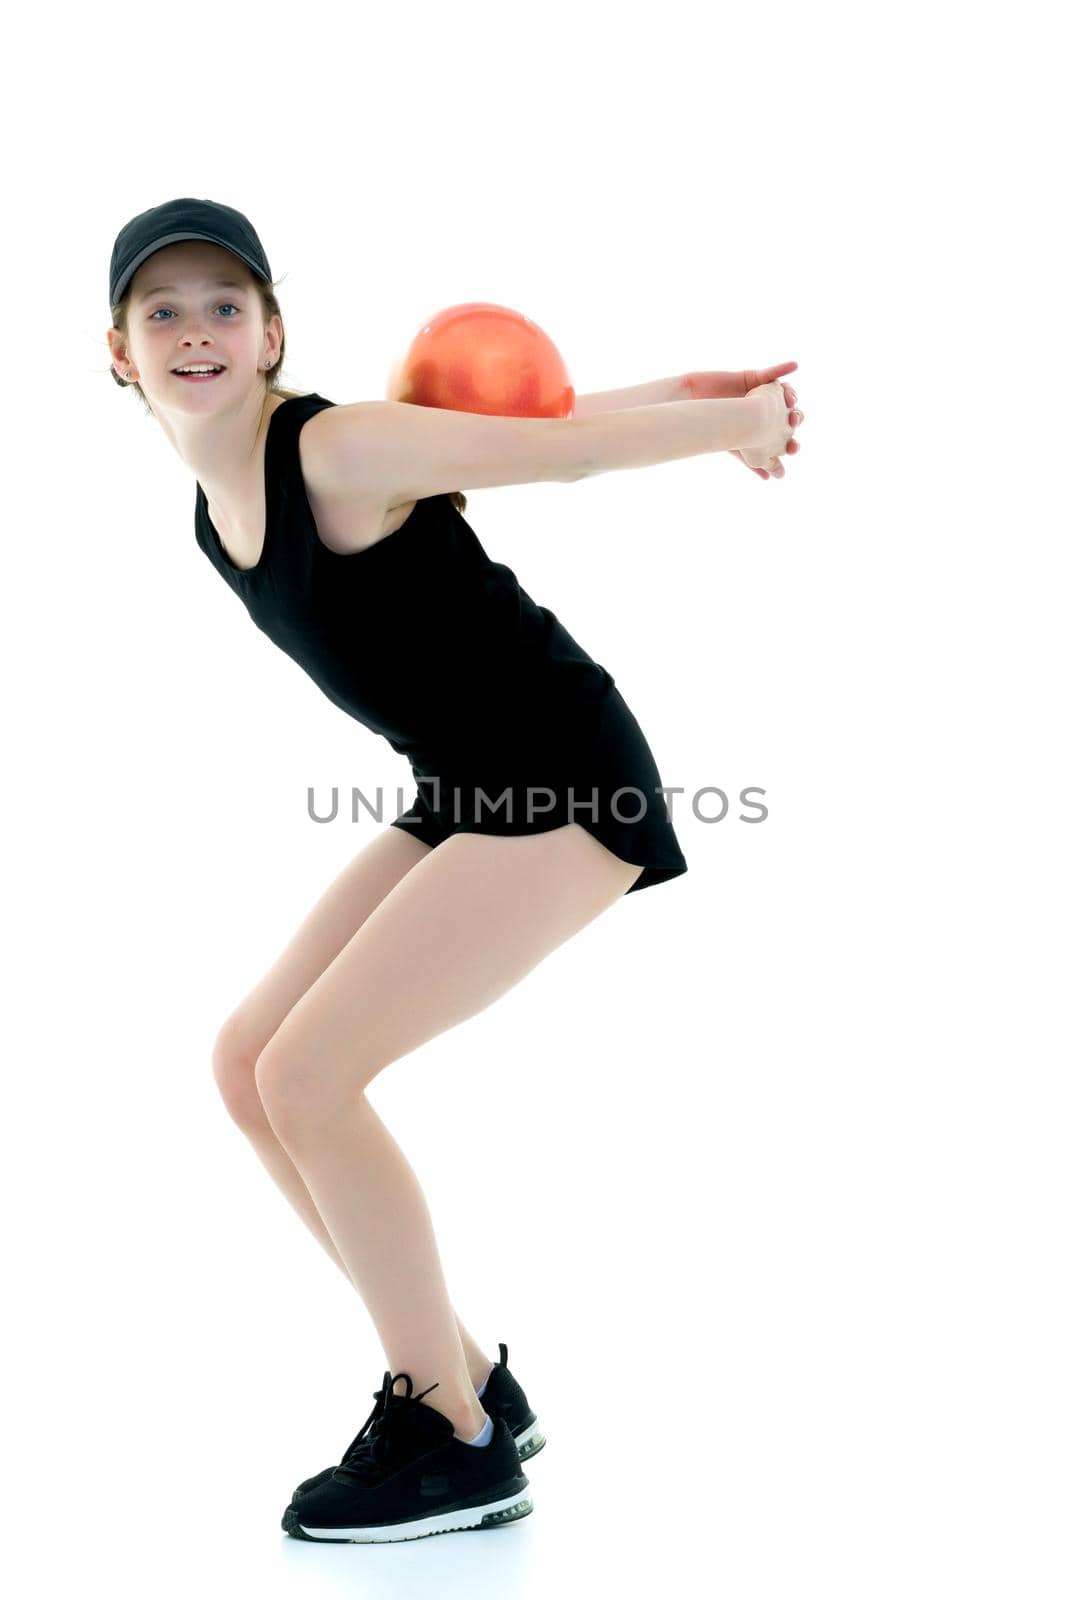 A charming little girl is engaged in fitness with a ball. The concept of gymnastics, health and sports. Isolated on white background.